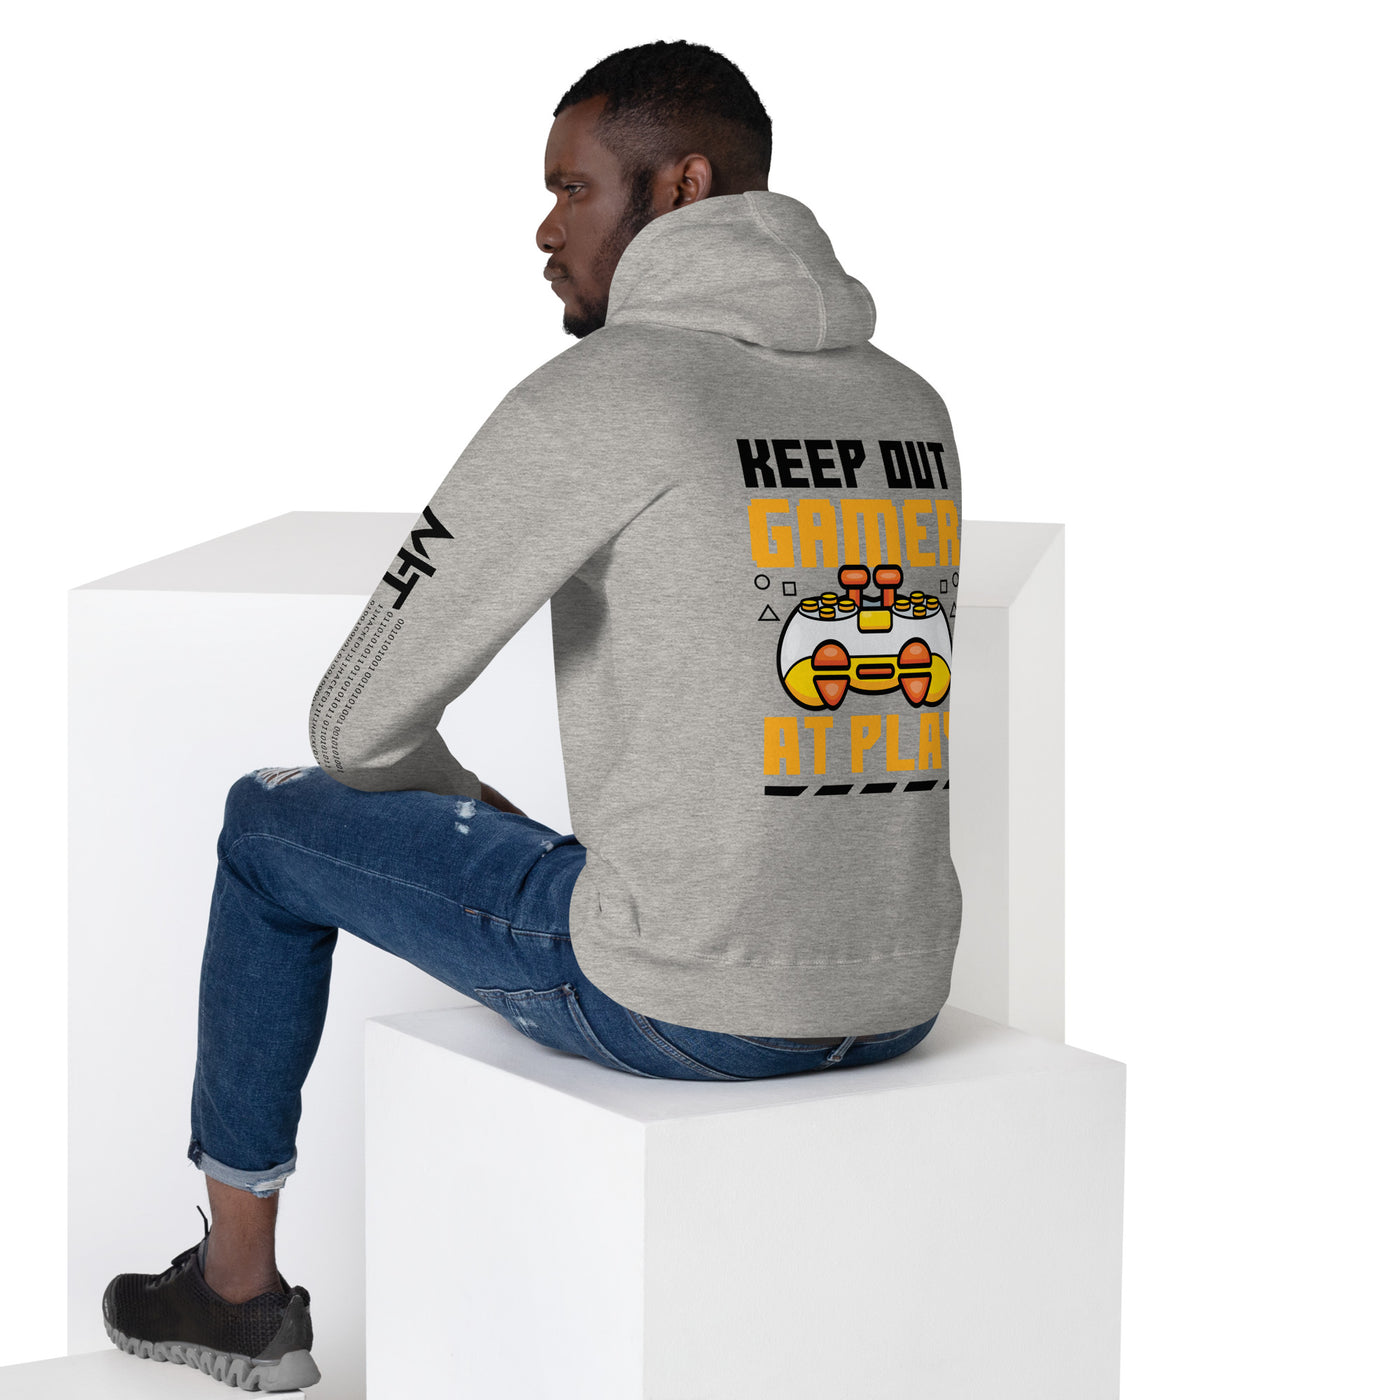 Keep Out Gamer At Play Rima 7 in Dark Text - Unisex Hoodie ( Back Print )